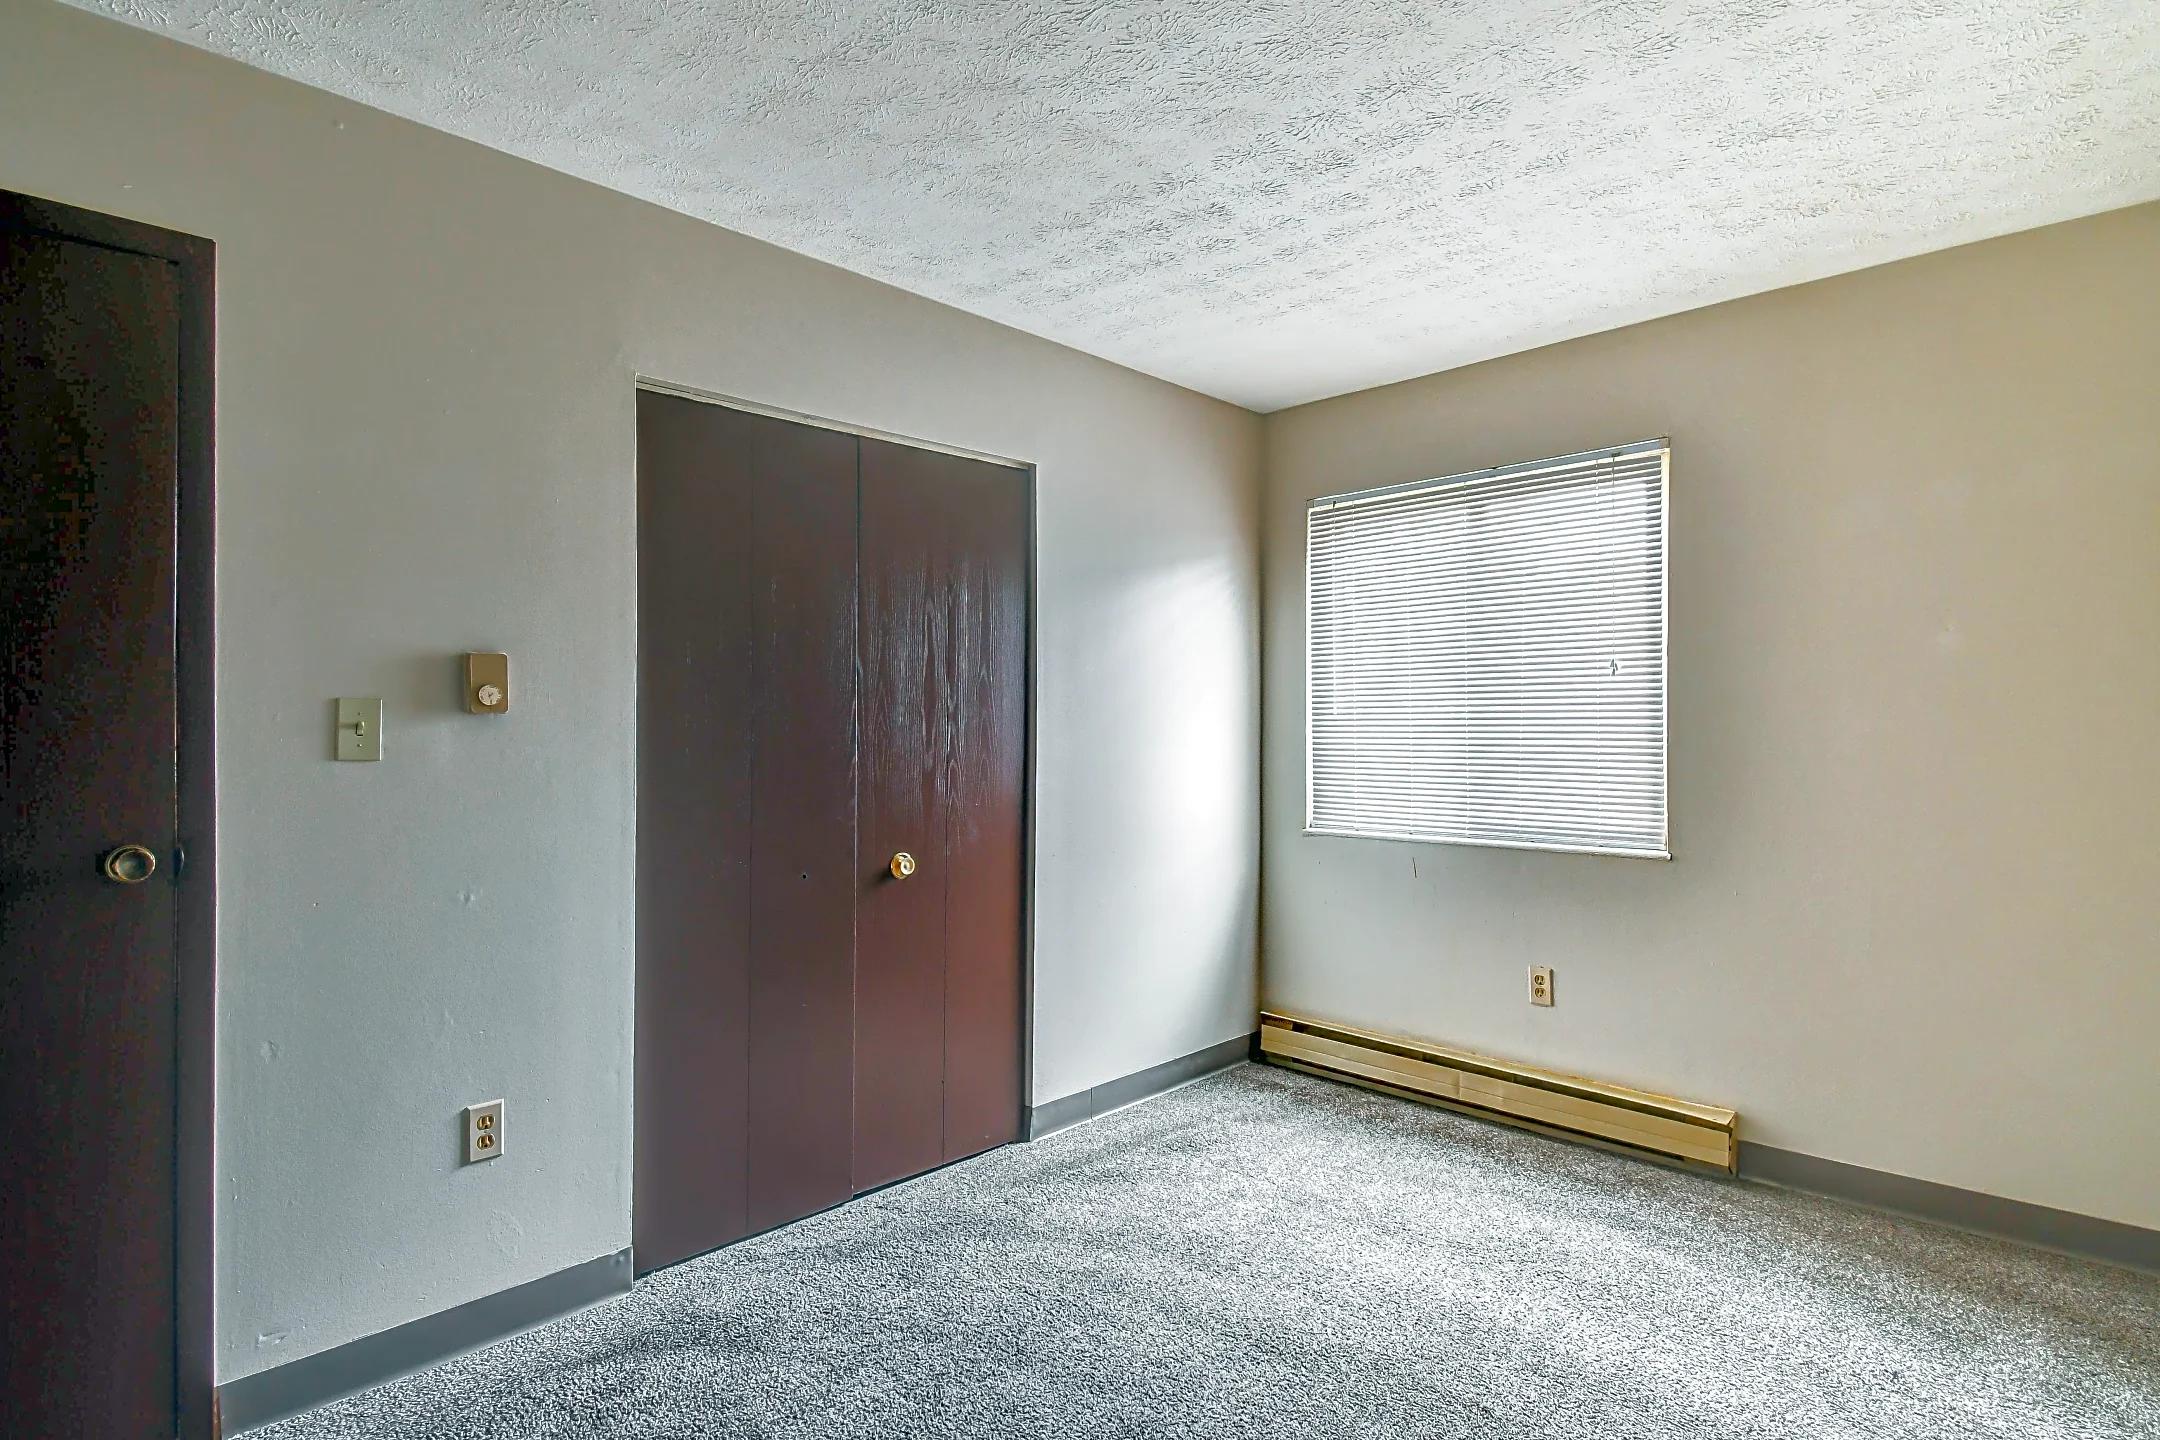 Bedroom - Knollwood Commons - Union City, OH